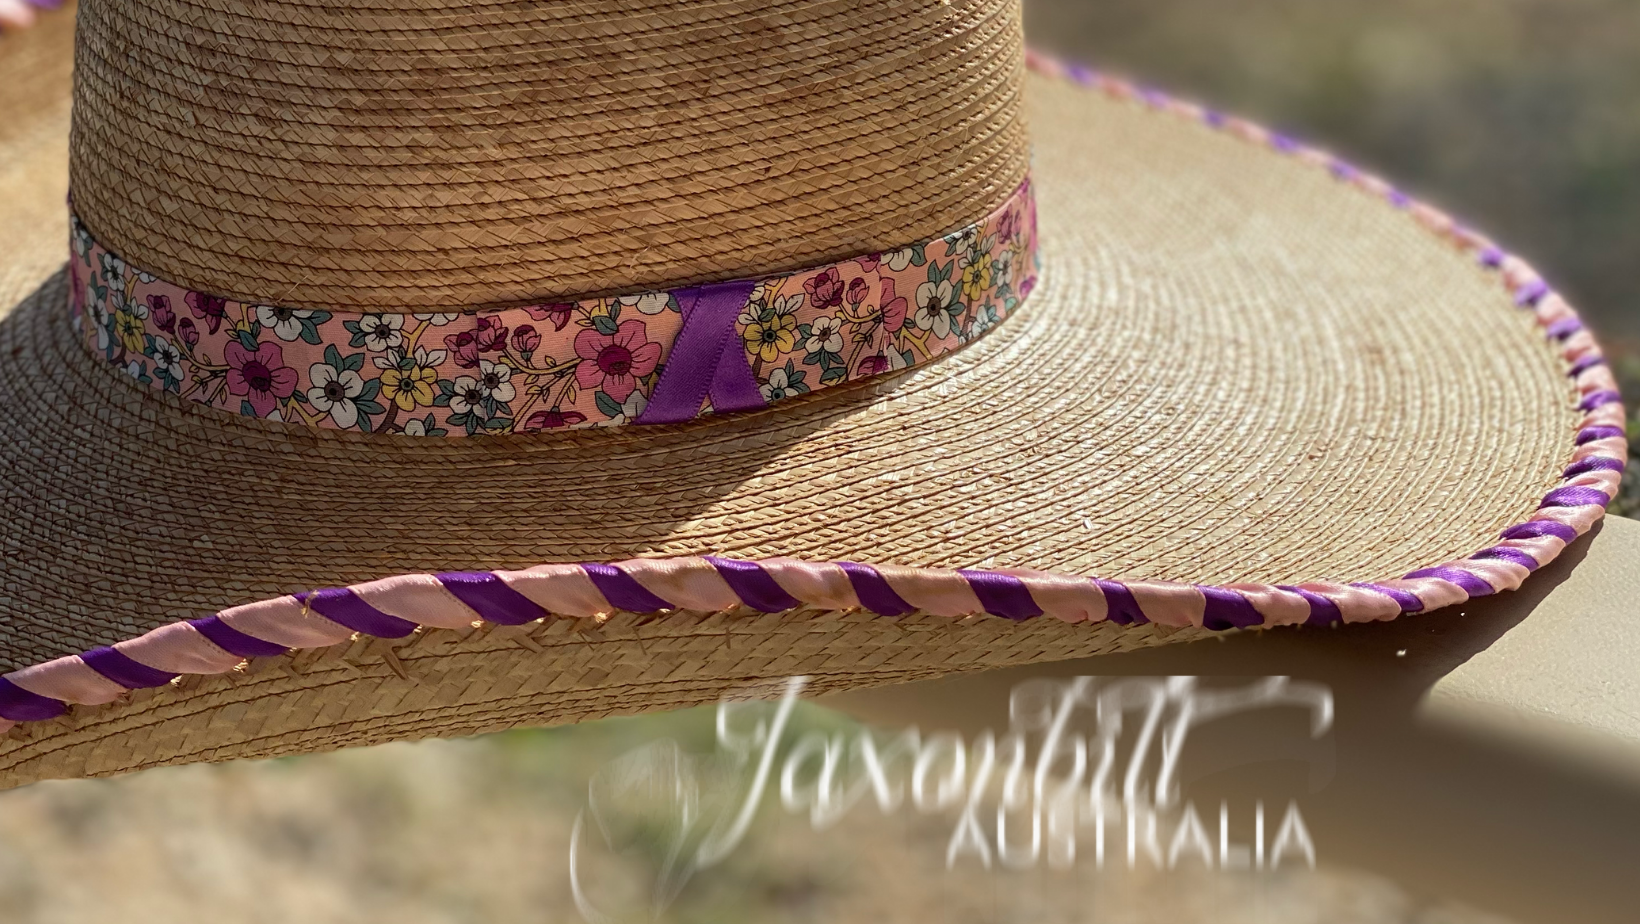 Jaxonbilt_Hats_are_Australian_made_palm_leaf_hats_and_crossbred_hats_for_cowgirls_and_cowboys_with_wide_brims_for_sun_protection_5”_brim_trim_on_edge_wide_crown_band_laced_edge_purple_pink_dark_oak